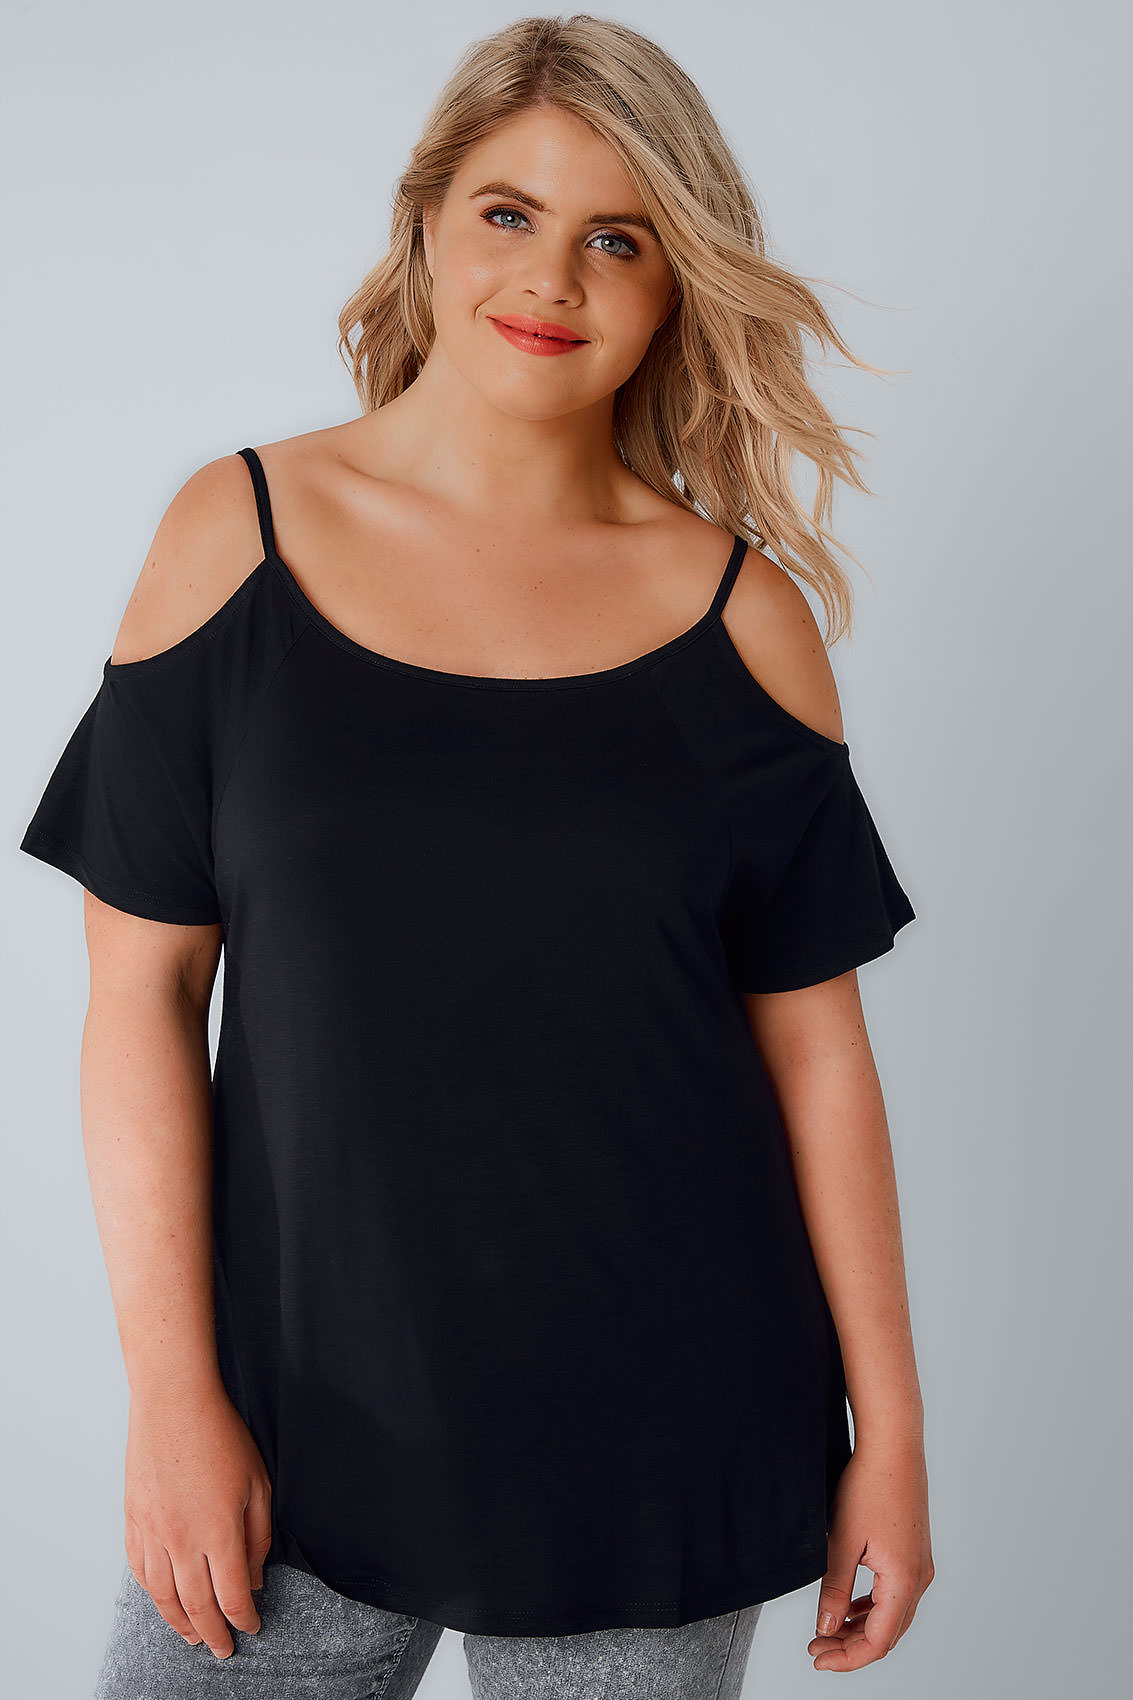 Black Strappy Cold Shoulder Jersey Top plus size 16 to 36